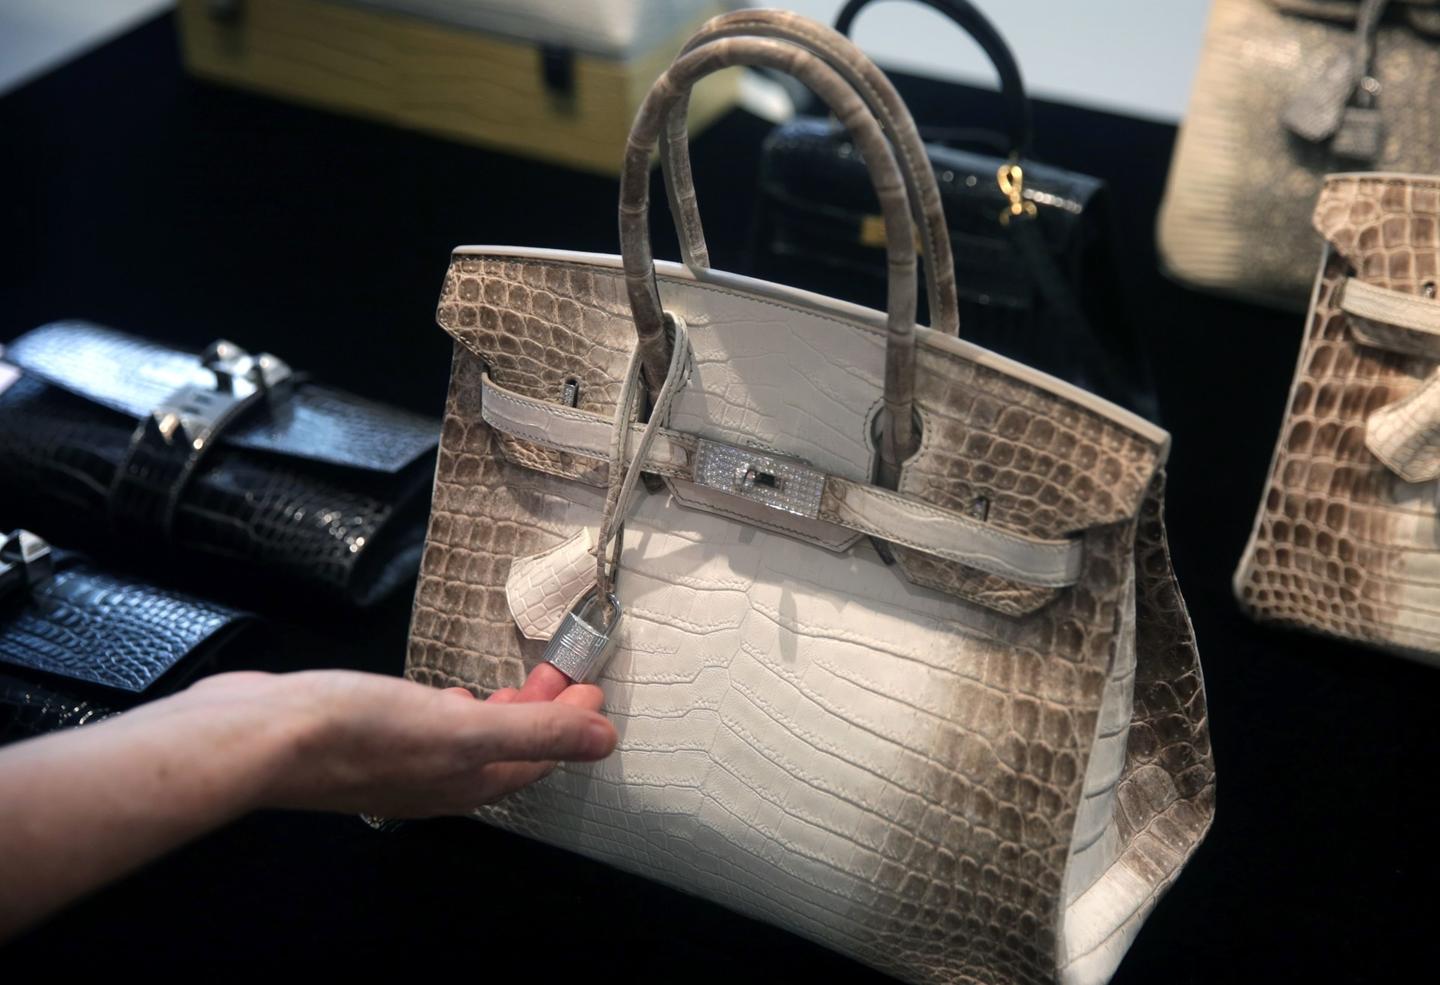 The Most Expensive Birkin Bags on the Internet